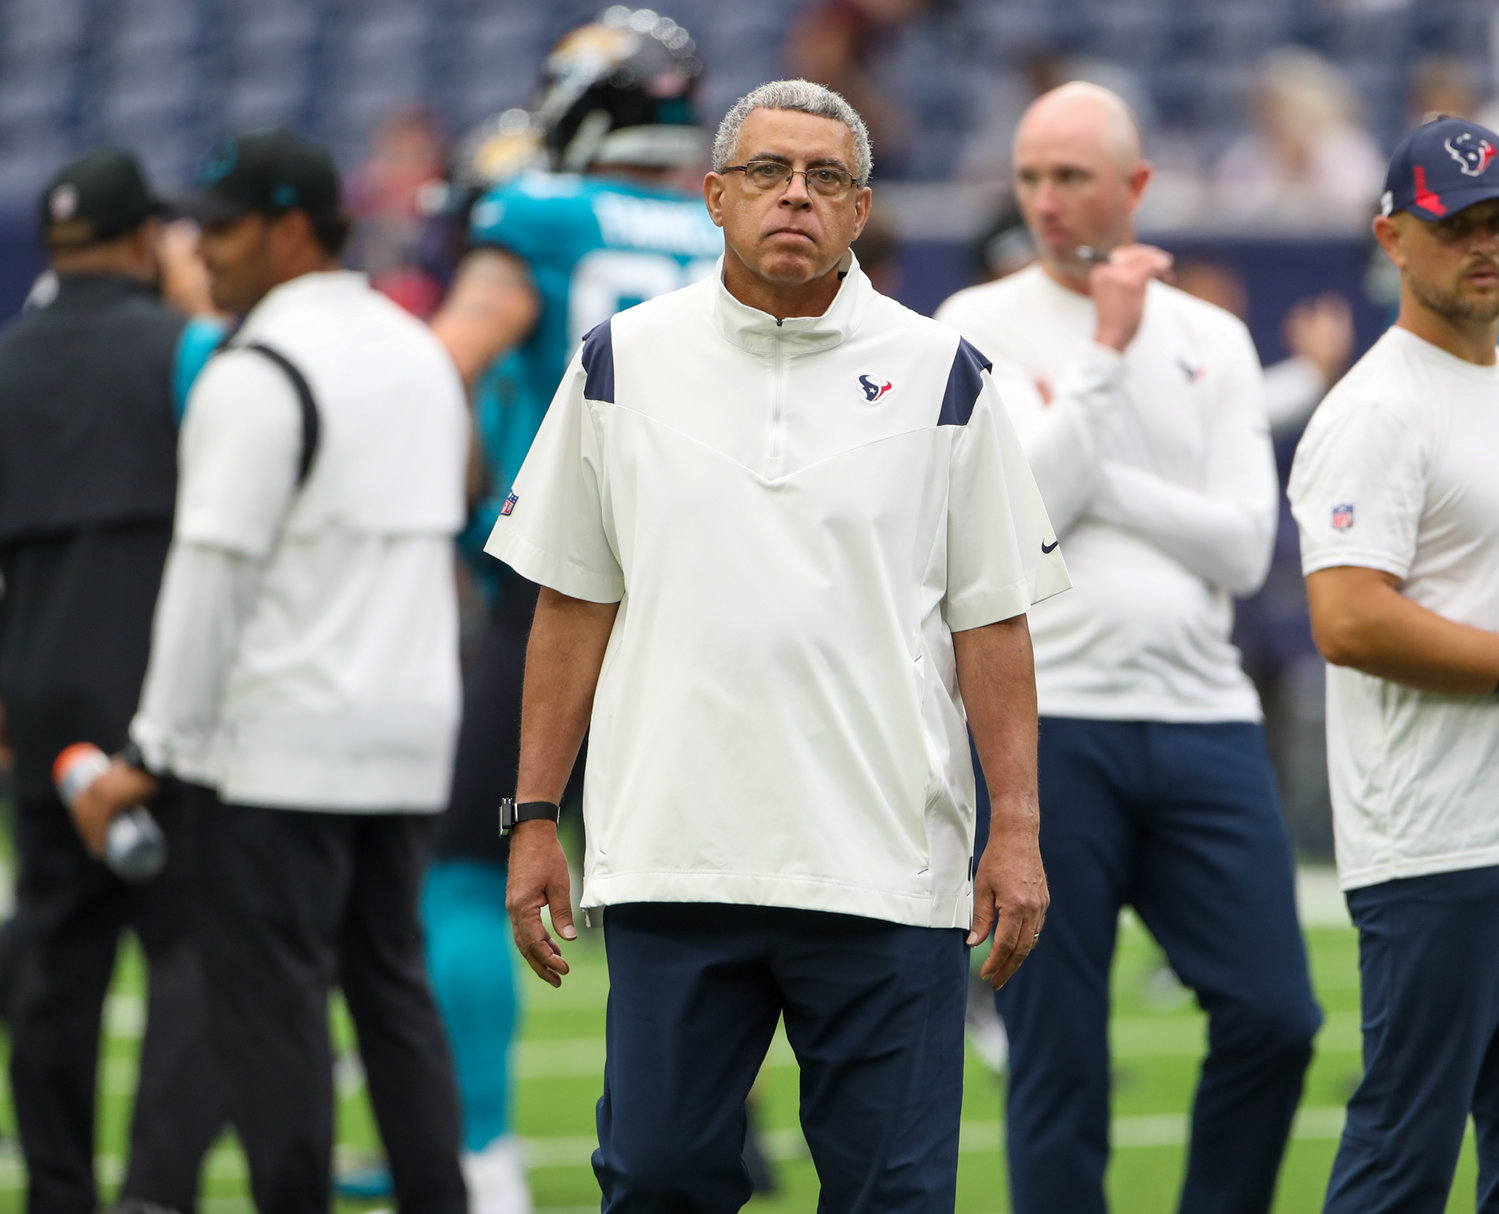 Houston Texans head coach David Culley before the start of an NFL game between the Houston Texans and the Jacksonville Jaguars on September 12, 2021 in Houston, Texas.